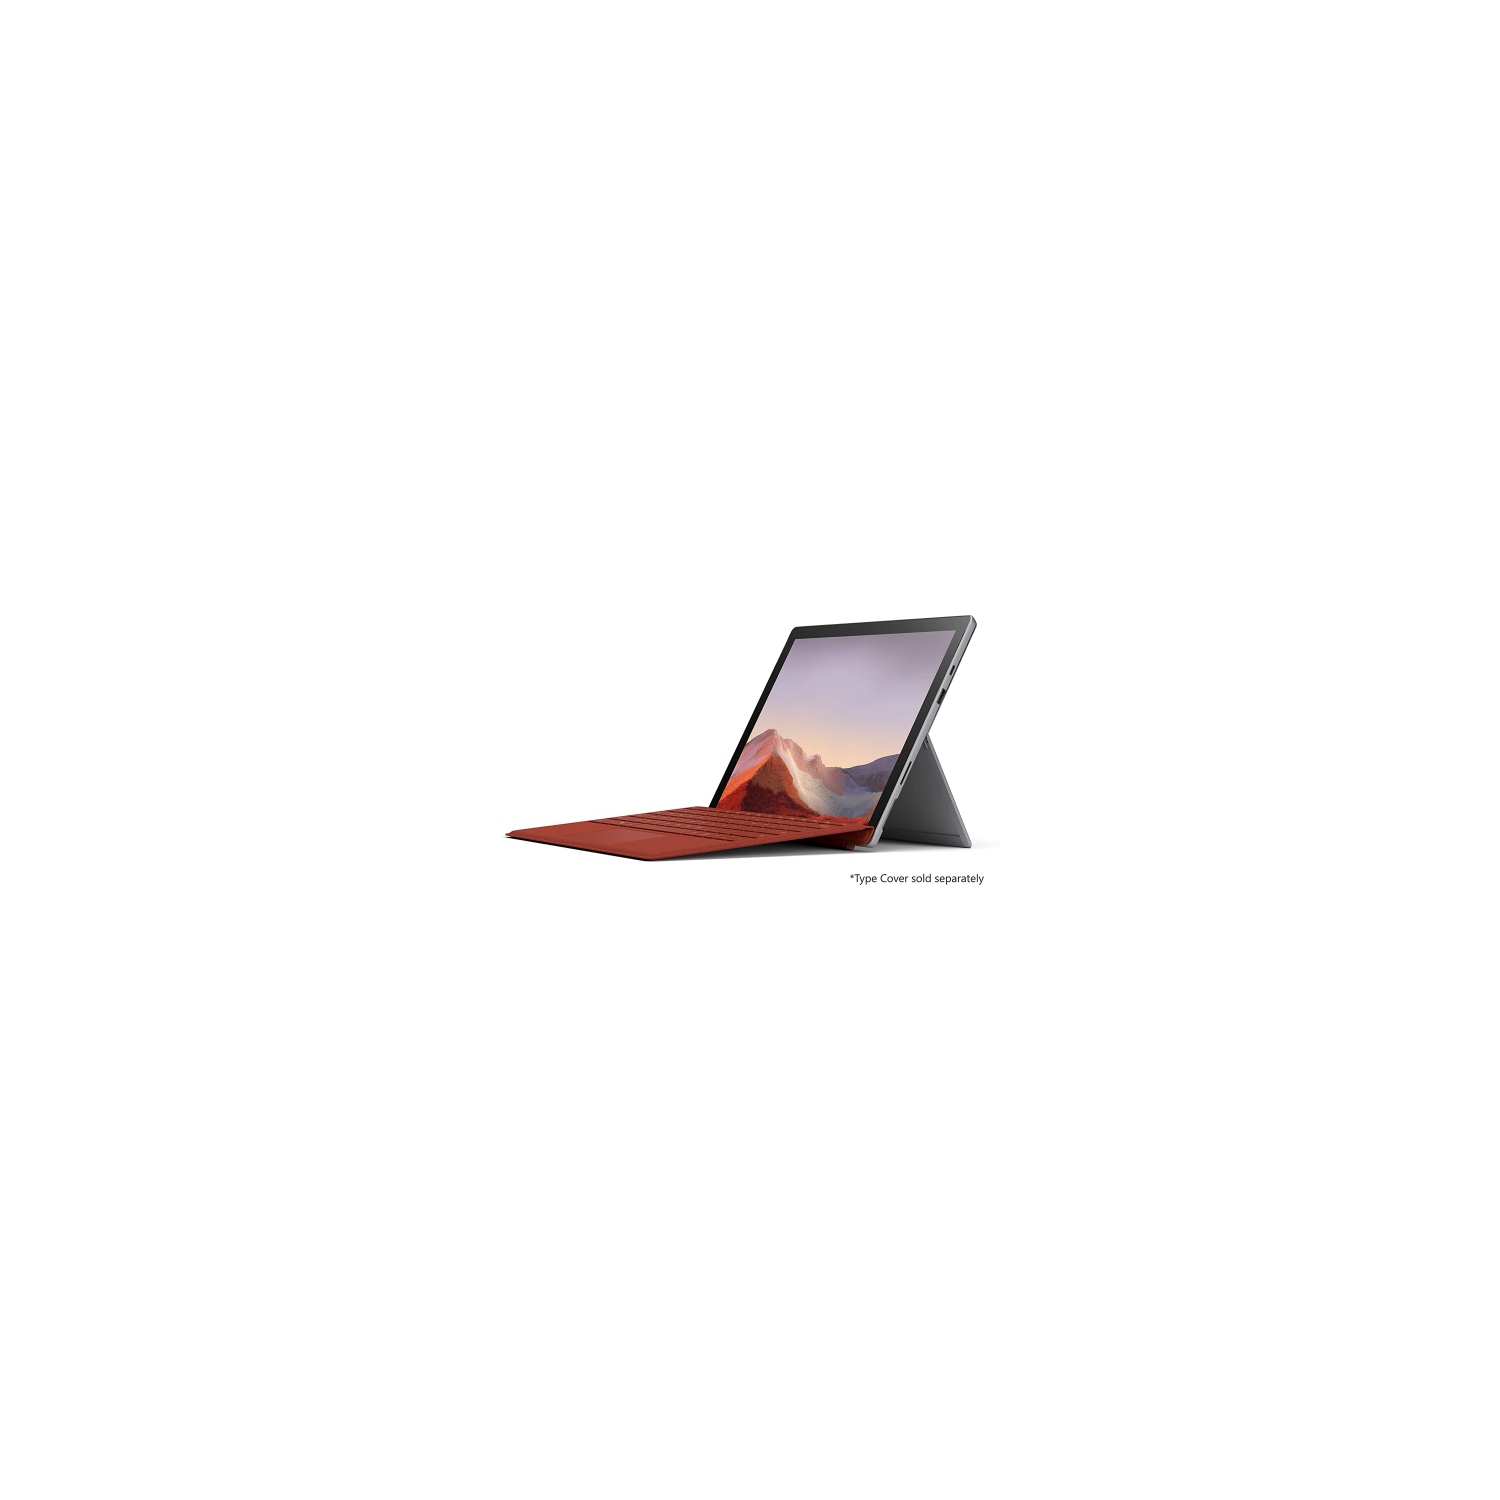 Refurbished (Excellent) - Microsoft Surface Pro 7 12.3" Windows 10 Tablet -Platinum (Intel Core i5/8 GB RAM/ 256 GB/ Win 10 Home)- Manufacturer Factory Recertified